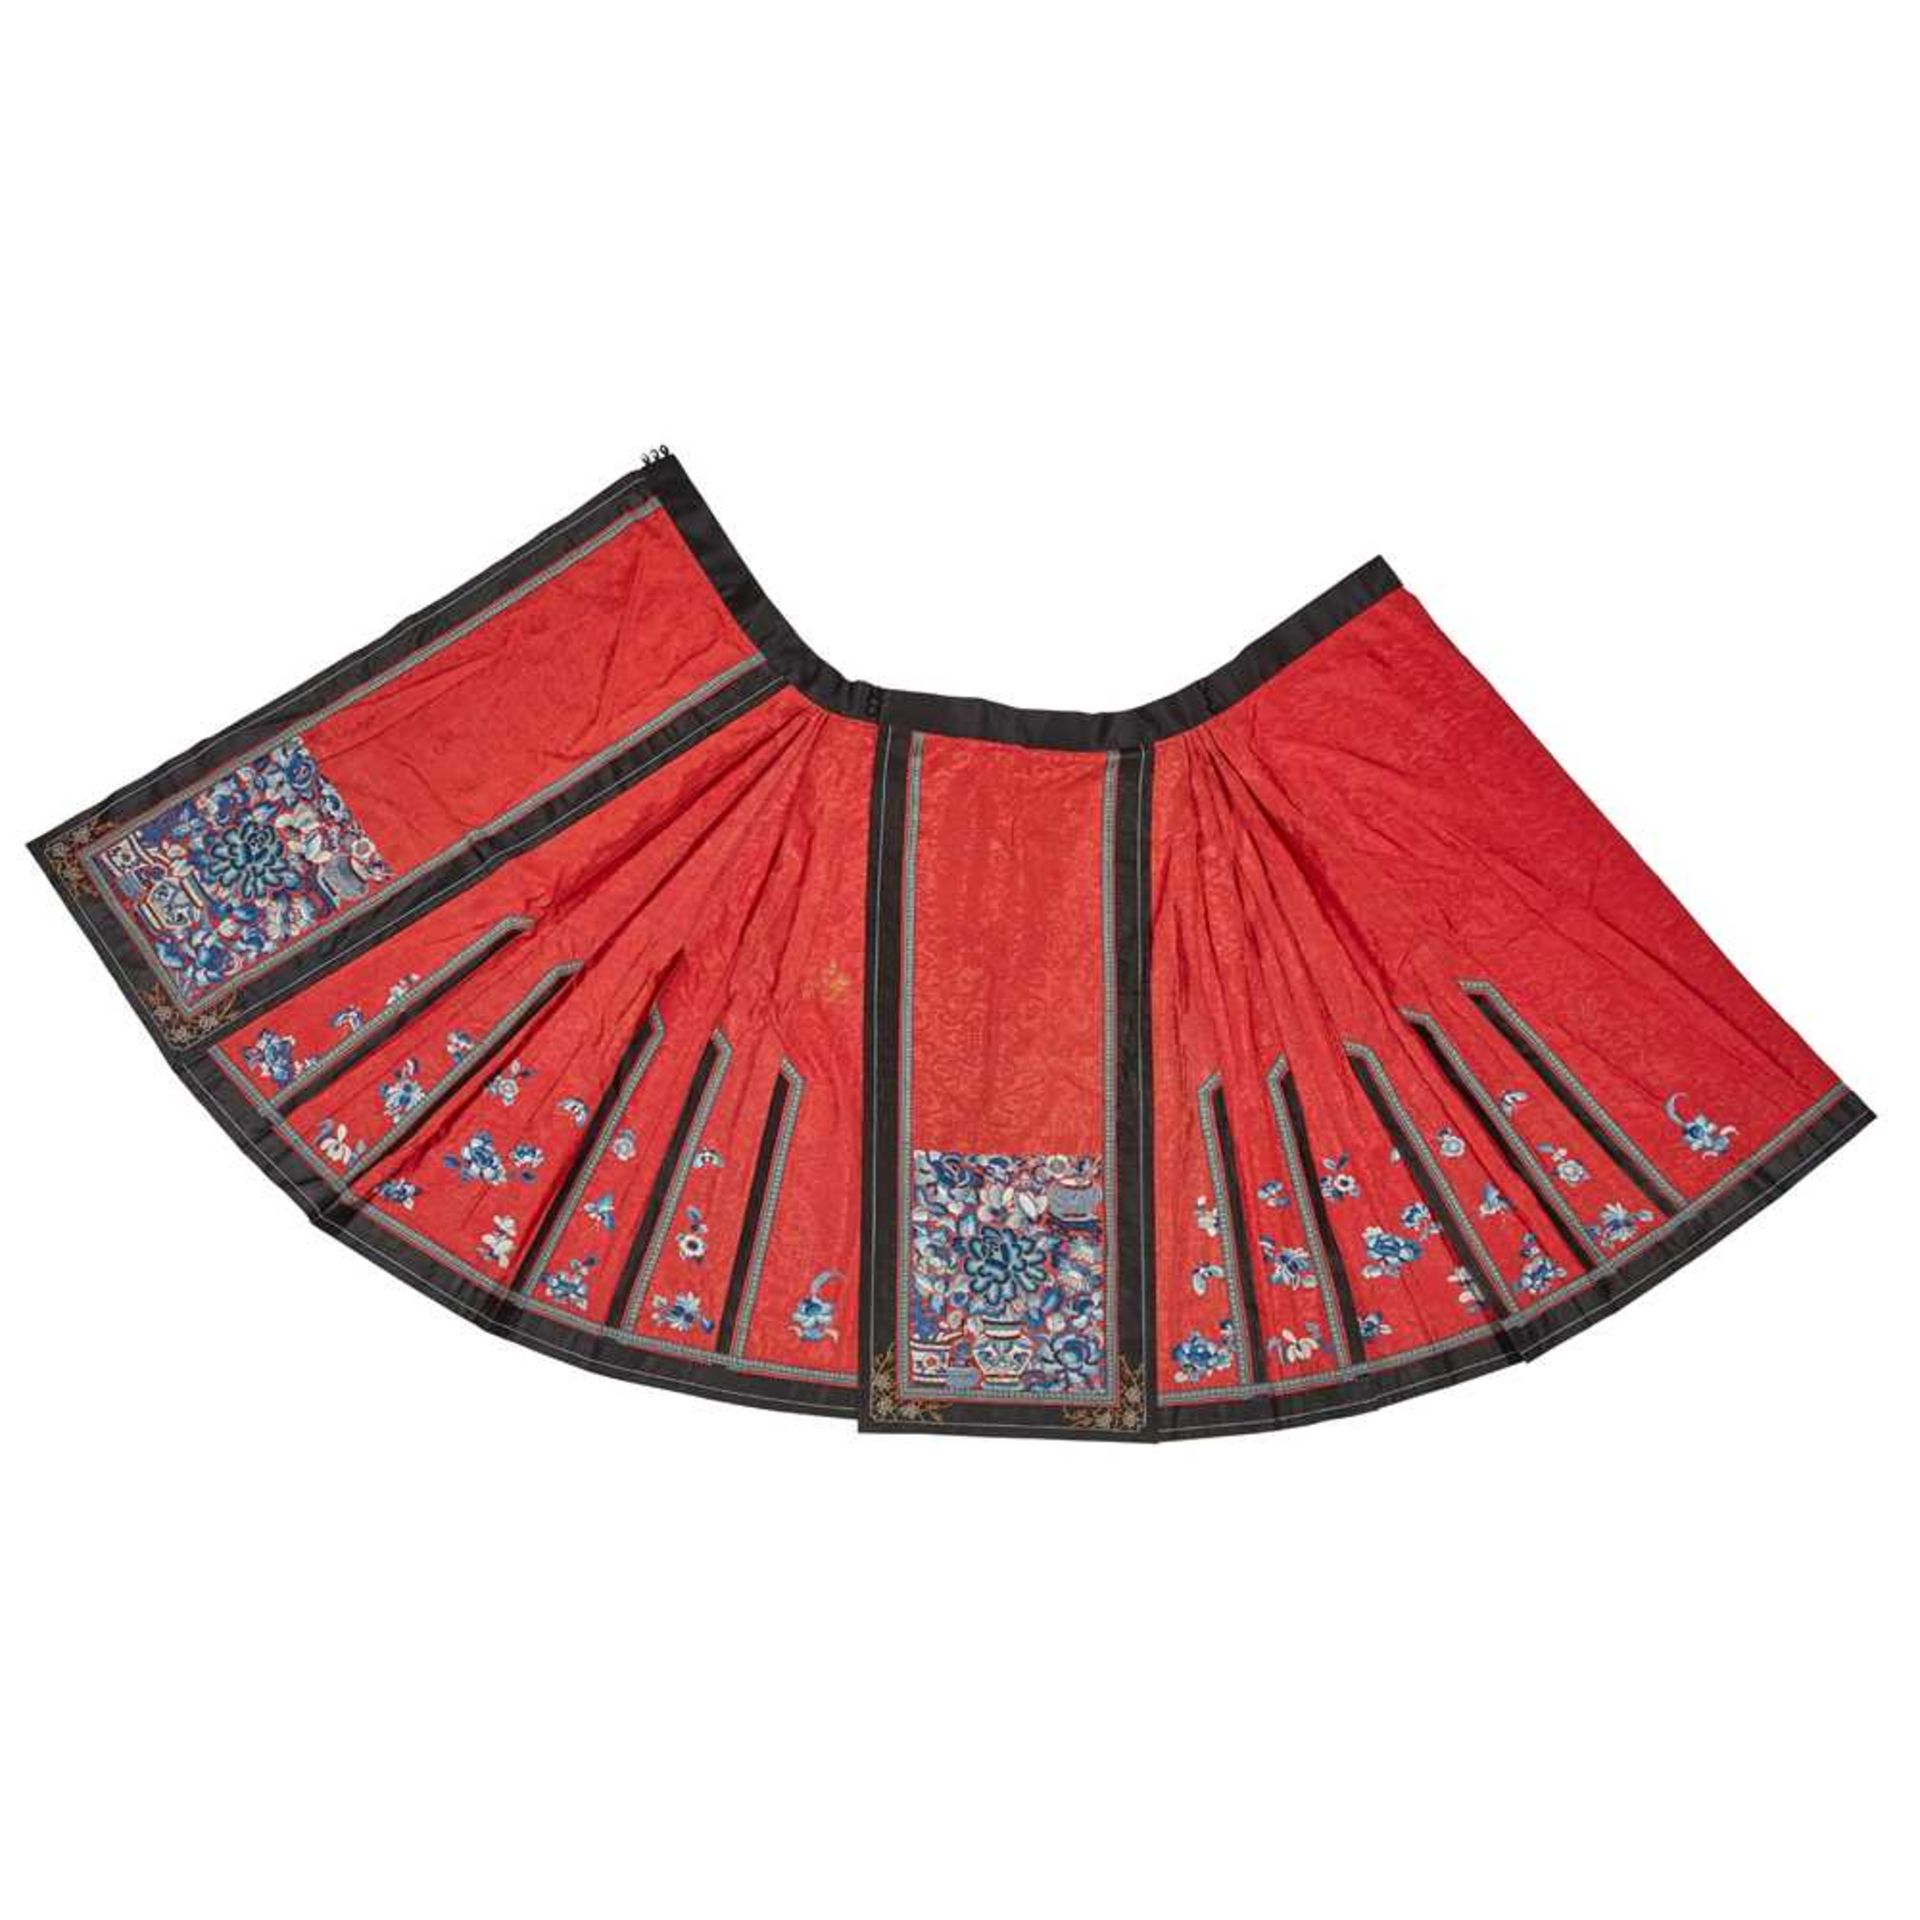 HAN CHINESE WOMAN'S EMBROIDERED RED SILK PLEATED SKIRT LATE QING DYNASTY-REPUBLIC PERIOD, 19TH-20TH